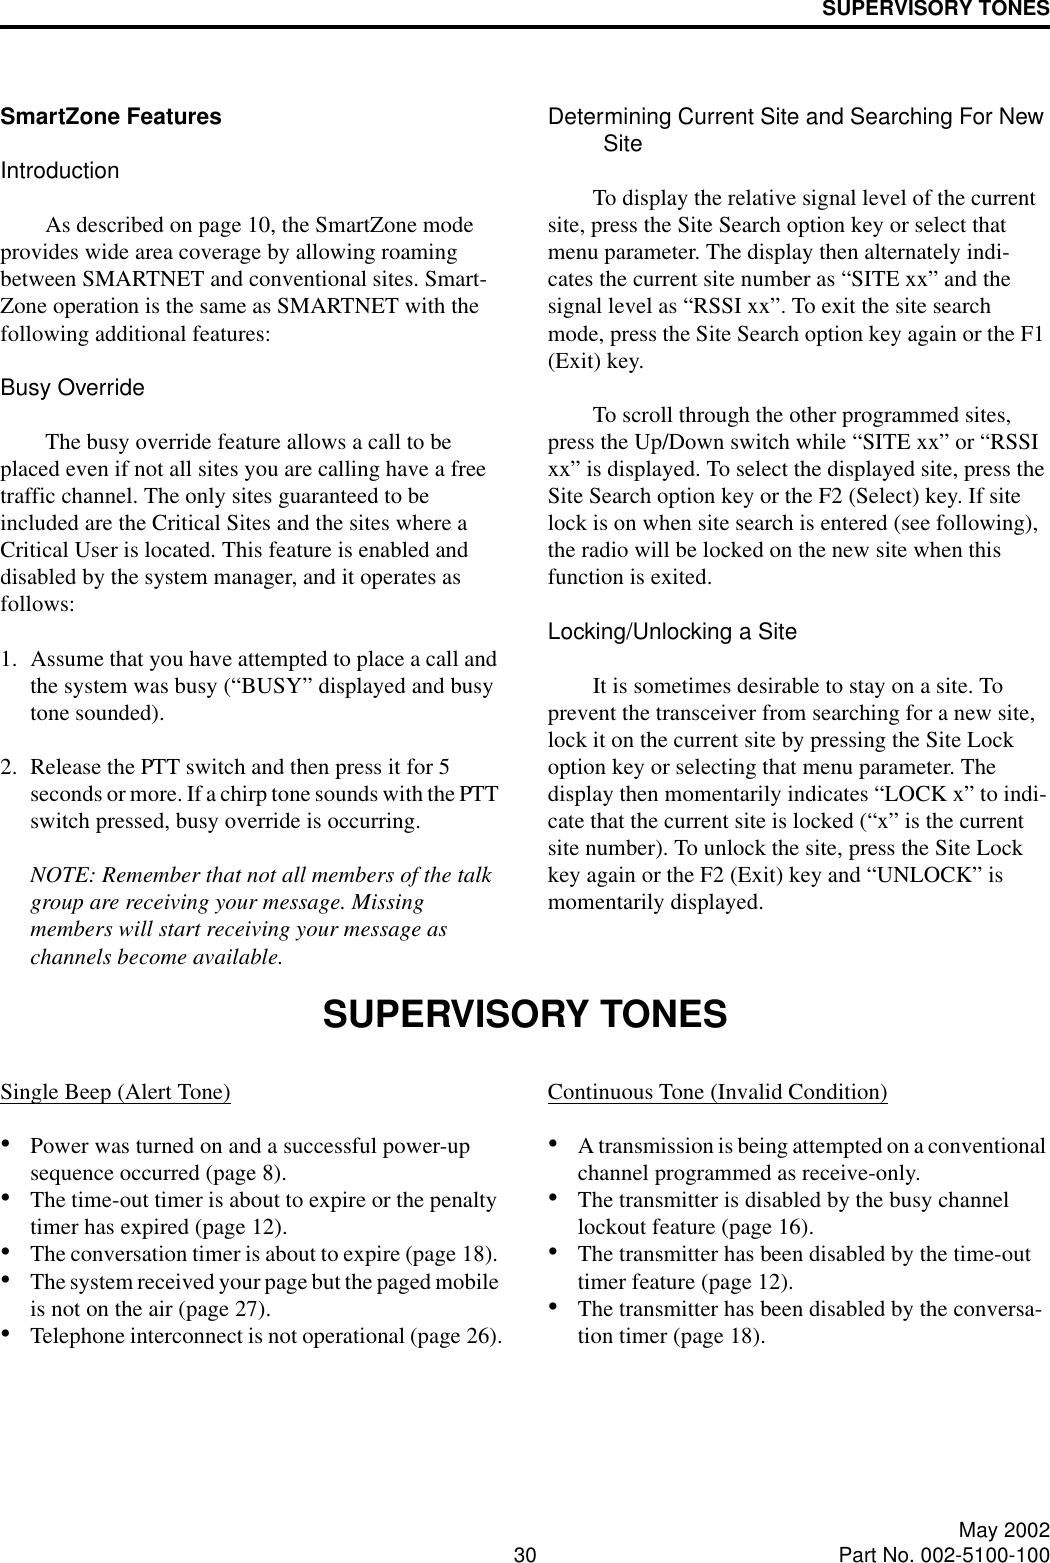 SUPERVISORY TONES30 May 2002Part No. 002-5100-100SmartZone FeaturesIntroductionAs described on page 10, the SmartZone mode provides wide area coverage by allowing roaming between SMARTNET and conventional sites. Smart-Zone operation is the same as SMARTNET with the following additional features:Busy OverrideThe busy override feature allows a call to be placed even if not all sites you are calling have a free traffic channel. The only sites guaranteed to be included are the Critical Sites and the sites where a Critical User is located. This feature is enabled and disabled by the system manager, and it operates as follows:1. Assume that you have attempted to place a call and the system was busy (“BUSY” displayed and busy tone sounded). 2. Release the PTT switch and then press it for 5 seconds or more. If a chirp tone sounds with the PTT switch pressed, busy override is occurring.NOTE: Remember that not all members of the talk group are receiving your message. Missing members will start receiving your message as channels become available.Determining Current Site and Searching For New SiteTo display the relative signal level of the current site, press the Site Search option key or select that menu parameter. The display then alternately indi-cates the current site number as “SITE xx” and the signal level as “RSSI xx”. To exit the site search mode, press the Site Search option key again or the F1 (Exit) key. To scroll through the other programmed sites, press the Up/Down switch while “SITE xx” or “RSSI xx” is displayed. To select the displayed site, press the Site Search option key or the F2 (Select) key. If site lock is on when site search is entered (see following), the radio will be locked on the new site when this function is exited. Locking/Unlocking a SiteIt is sometimes desirable to stay on a site. To prevent the transceiver from searching for a new site, lock it on the current site by pressing the Site Lock option key or selecting that menu parameter. The display then momentarily indicates “LOCK x” to indi-cate that the current site is locked (“x” is the current site number). To unlock the site, press the Site Lock key again or the F2 (Exit) key and “UNLOCK” is momentarily displayed. SUPERVISORY TONES Single Beep (Alert Tone)•Power was turned on and a successful power-up sequence occurred (page 8).•The time-out timer is about to expire or the penalty timer has expired (page 12).•The conversation timer is about to expire (page 18). •The system received your page but the paged mobile is not on the air (page 27).•Telephone interconnect is not operational (page 26).Continuous Tone (Invalid Condition)•A transmission is being attempted on a conventional channel programmed as receive-only.•The transmitter is disabled by the busy channel lockout feature (page 16).•The transmitter has been disabled by the time-out timer feature (page 12).•The transmitter has been disabled by the conversa-tion timer (page 18).